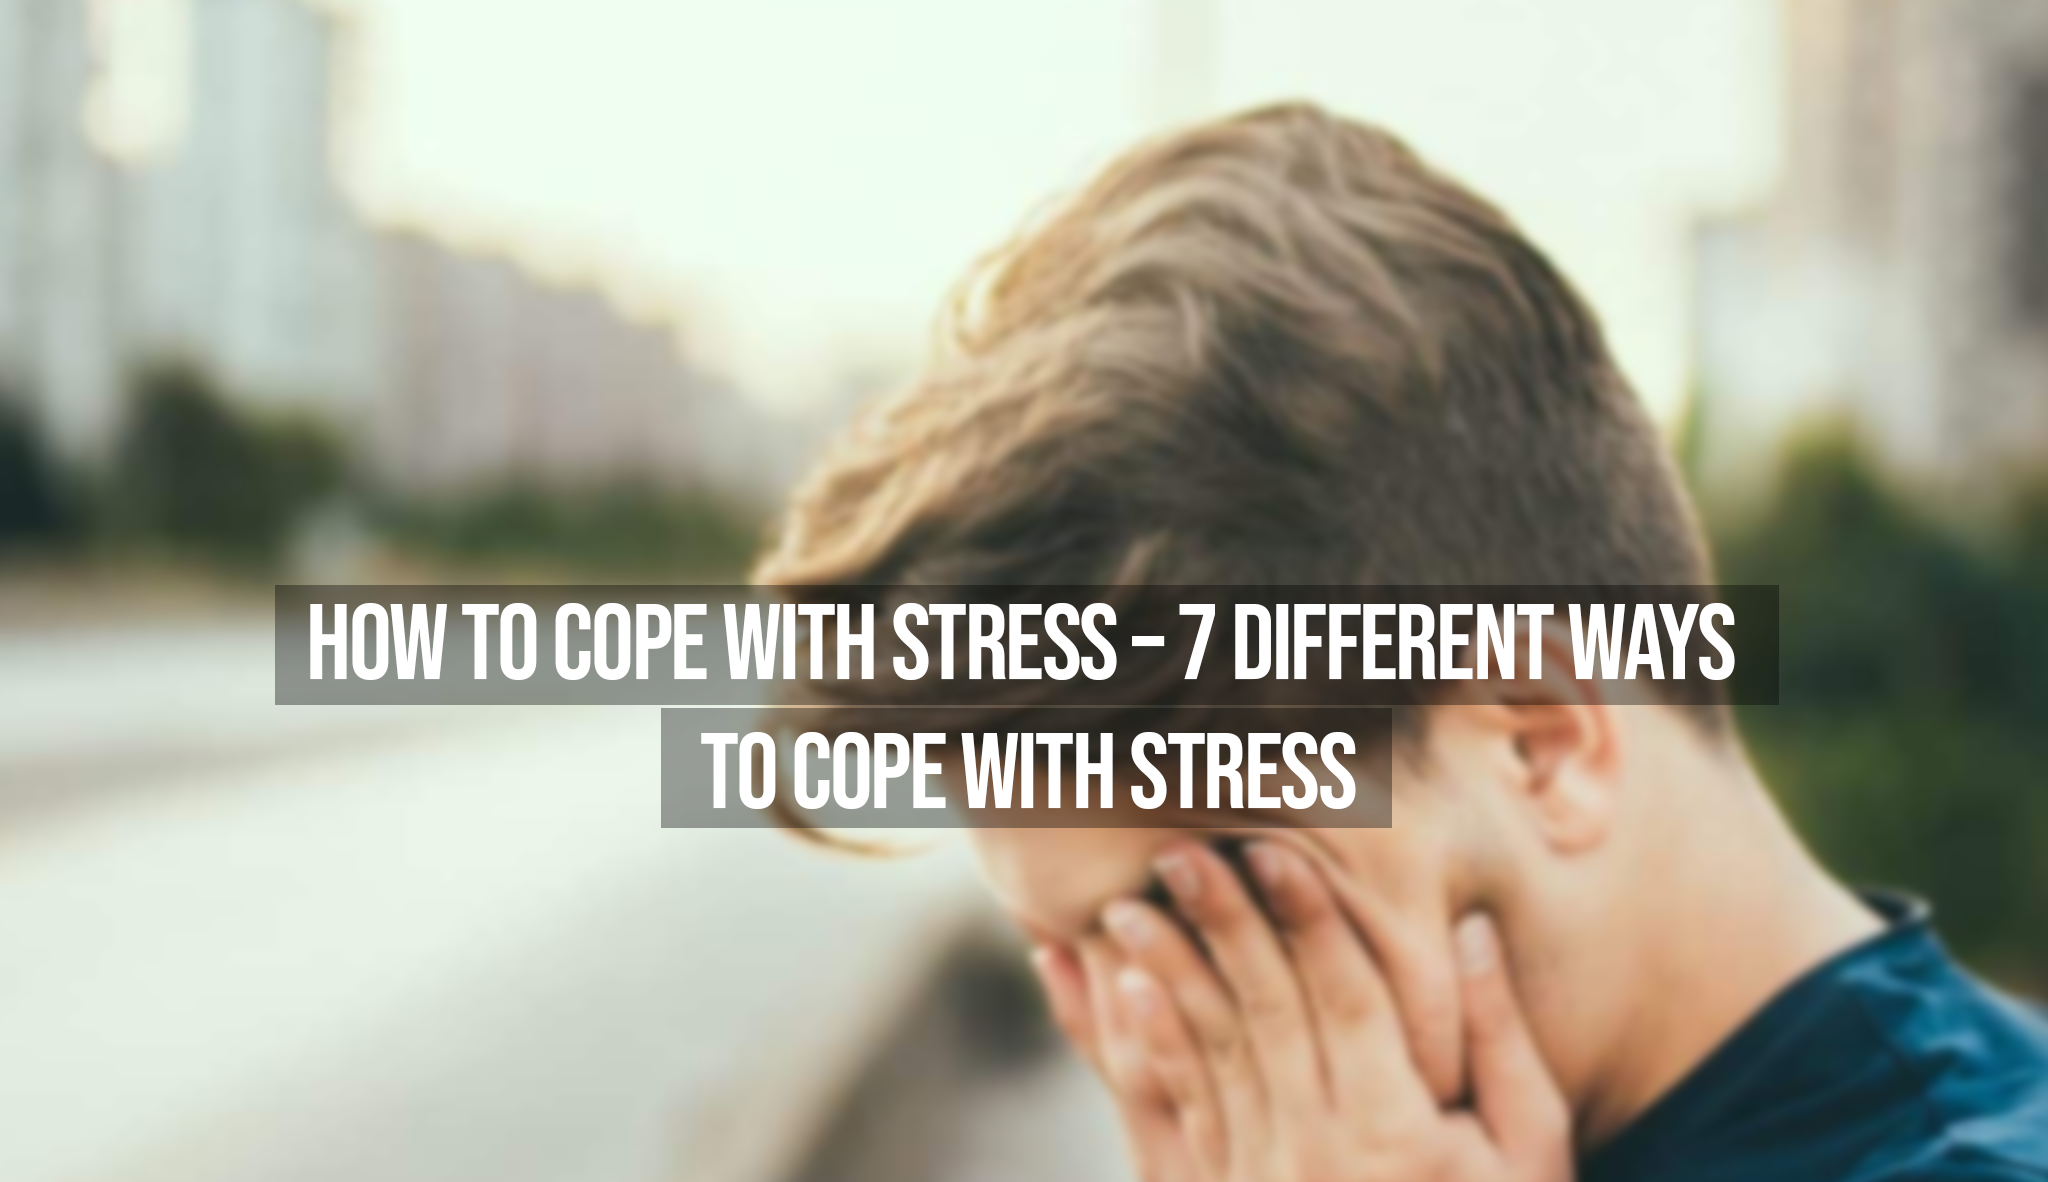 How To Cope With Stress - 7 Different Ways To Cope with Stress